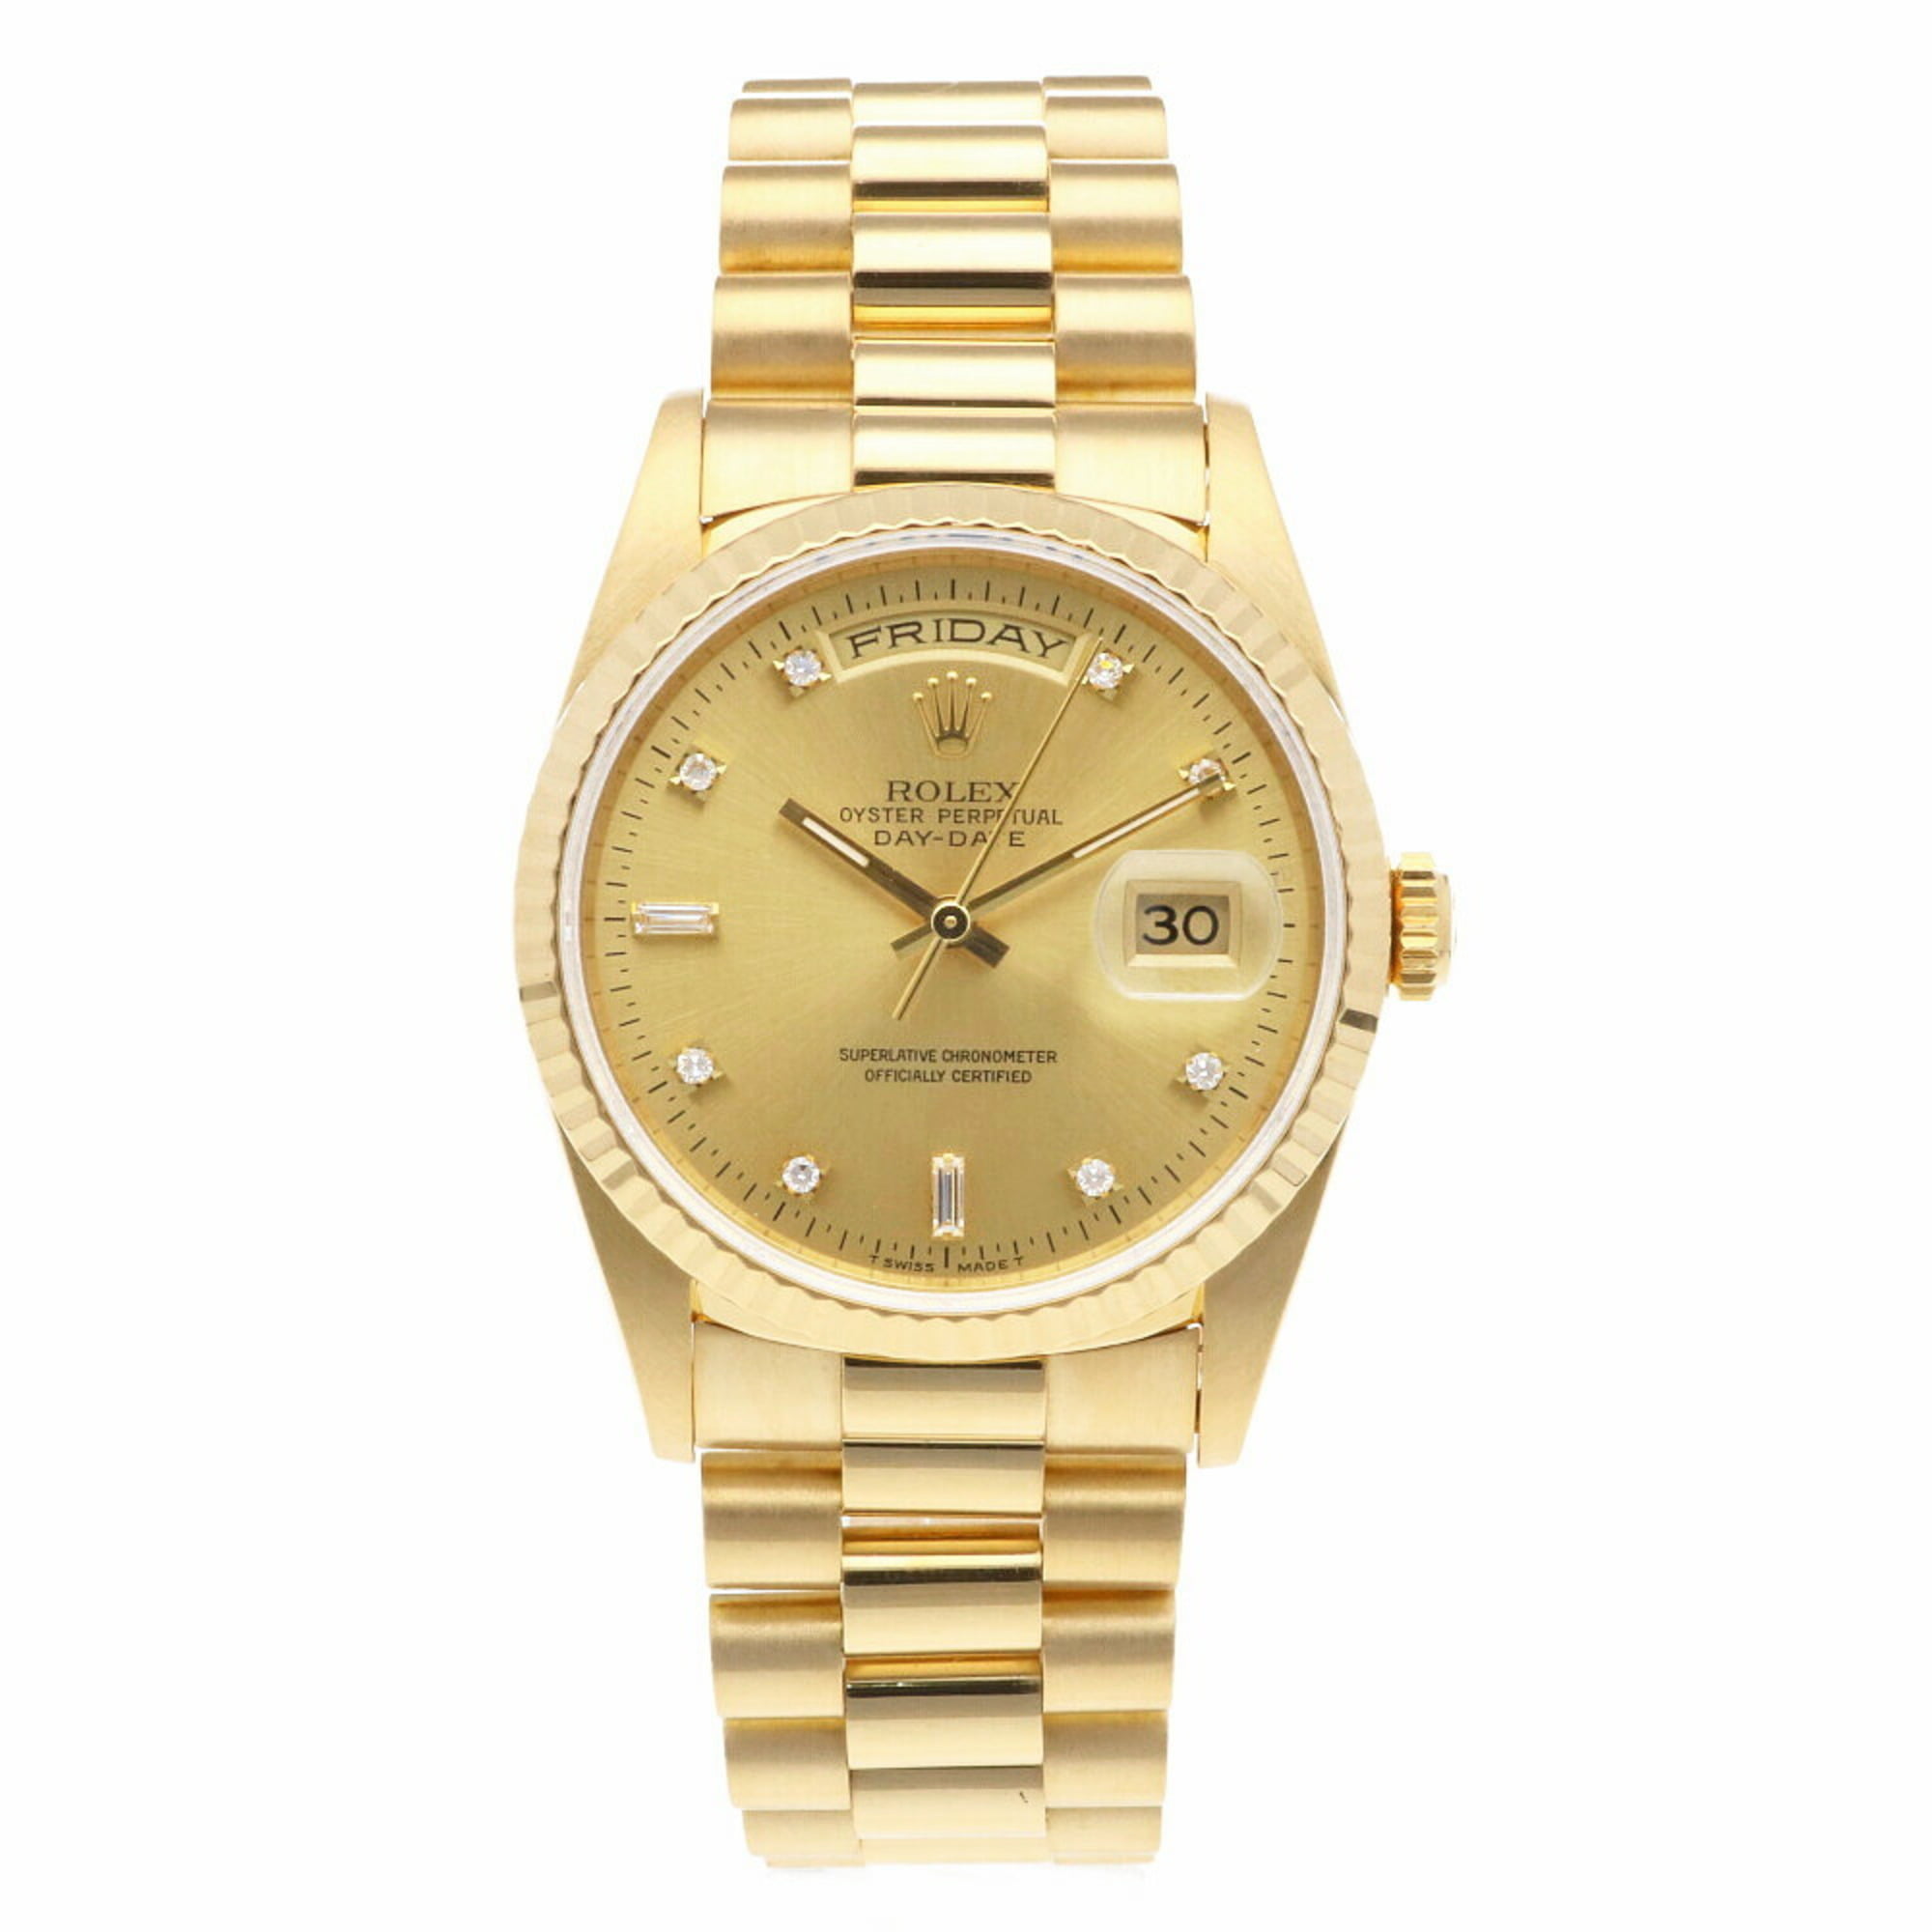 udredning Dyrt te Authenticated Used Rolex ROLEX Day Date Oyster Perpetual Watch 18K K18  Yellow Gold 18238 Men's - Walmart.com